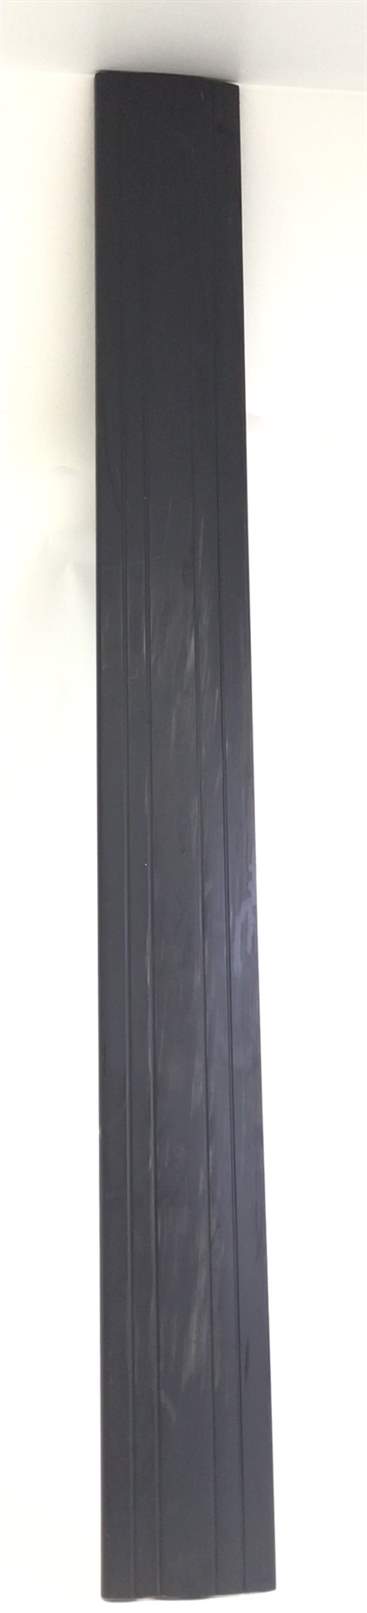 Left or Right Side Rail Cover (Used)